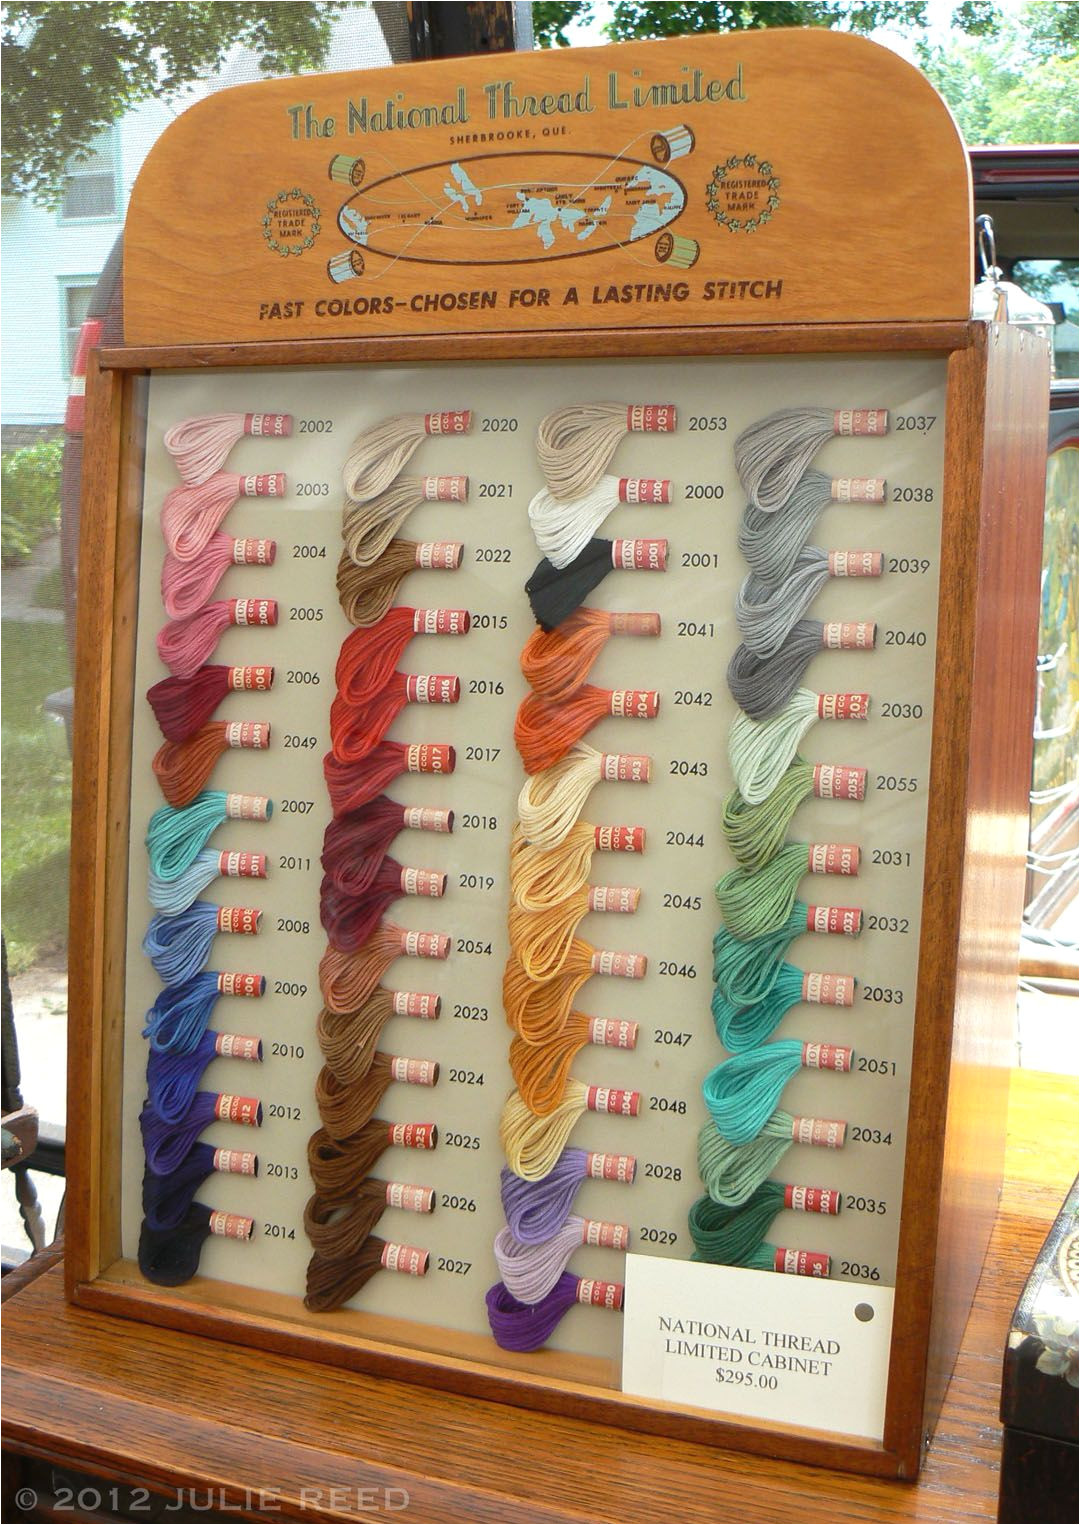 Fabric Stores Near Myrtle Beach Sc Fabulous Embroidery Thread Store Display Vintage Sewing Fabric